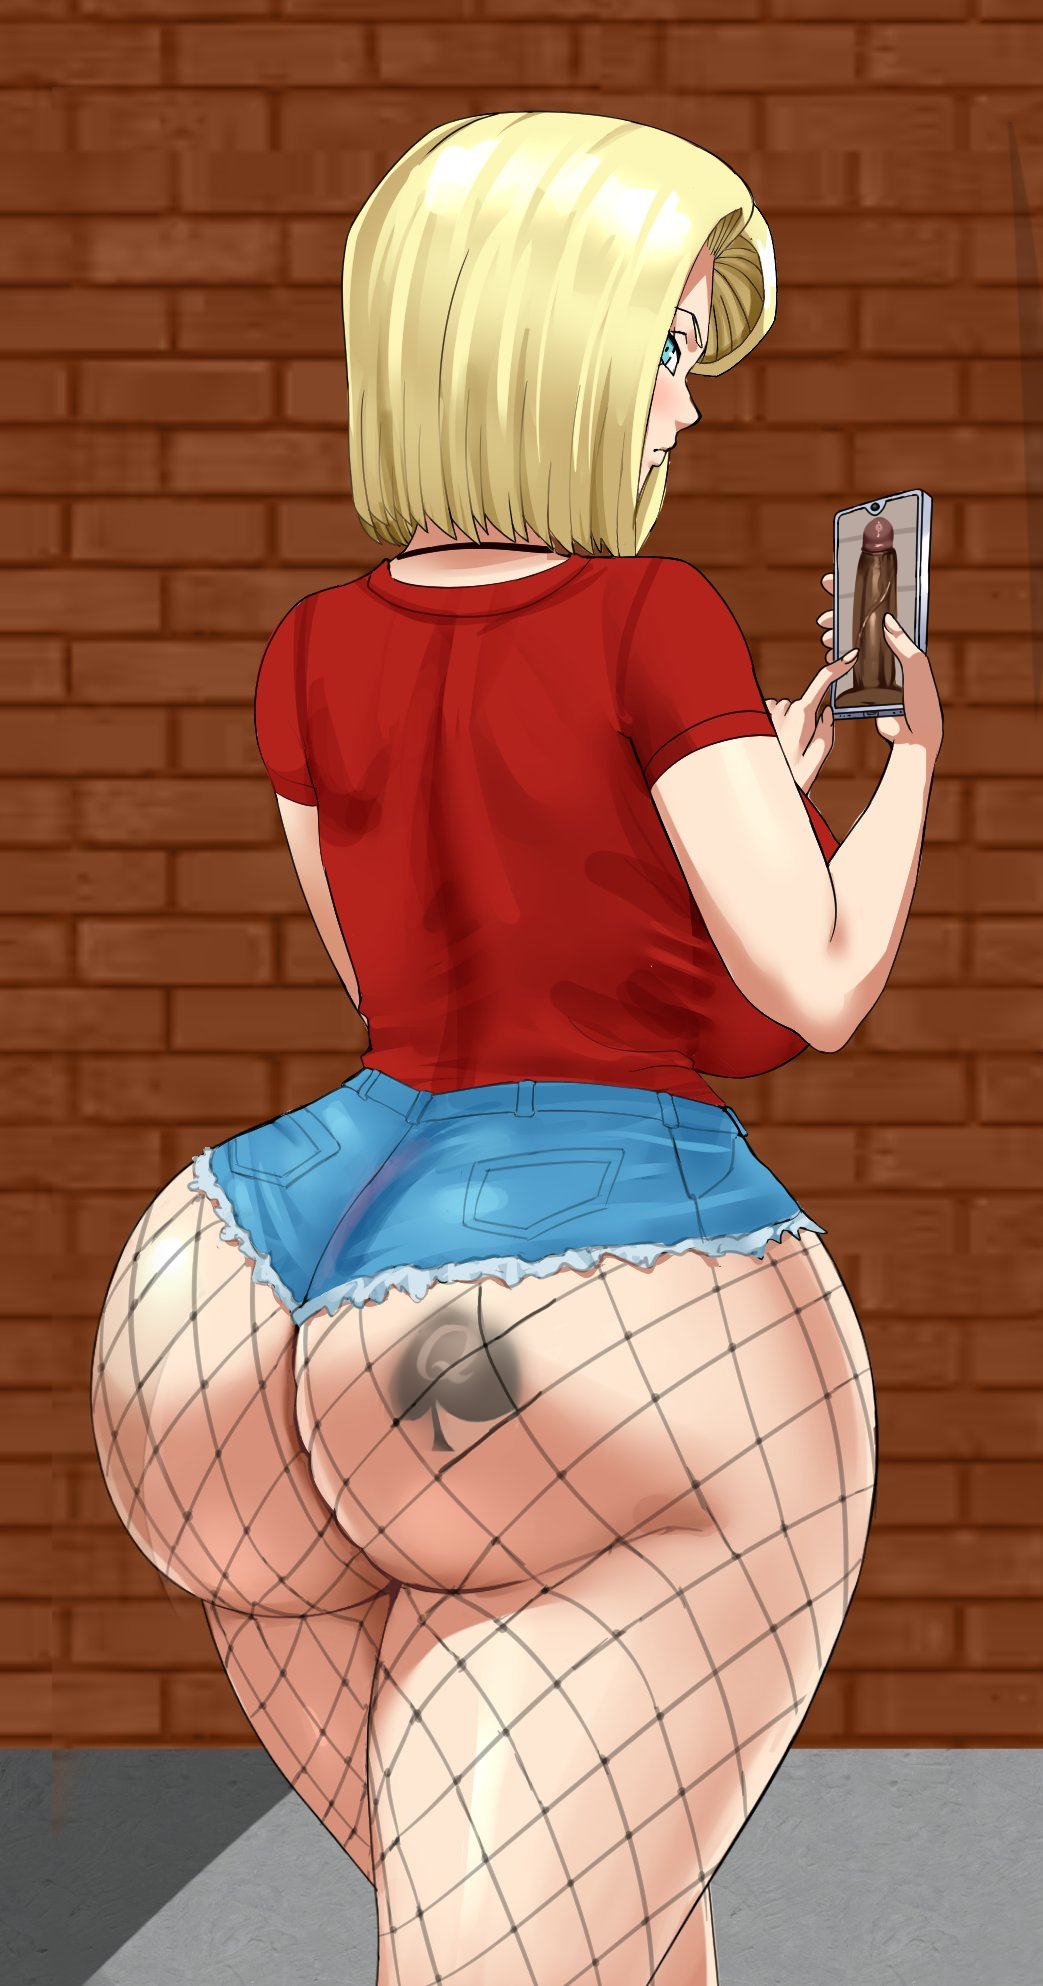 1girls alley android_18 ass back_view blacked blonde_hair blue_eyes breasts dick_pic dragon_ball dragon_ball_z edit female fishnets large_ass large_breasts light-skinned_female light_skin looking_at_viewer phone pinkpawg queen_of_spades red_shirt spade spade_tattoo tattoo voluptuous wide_hips